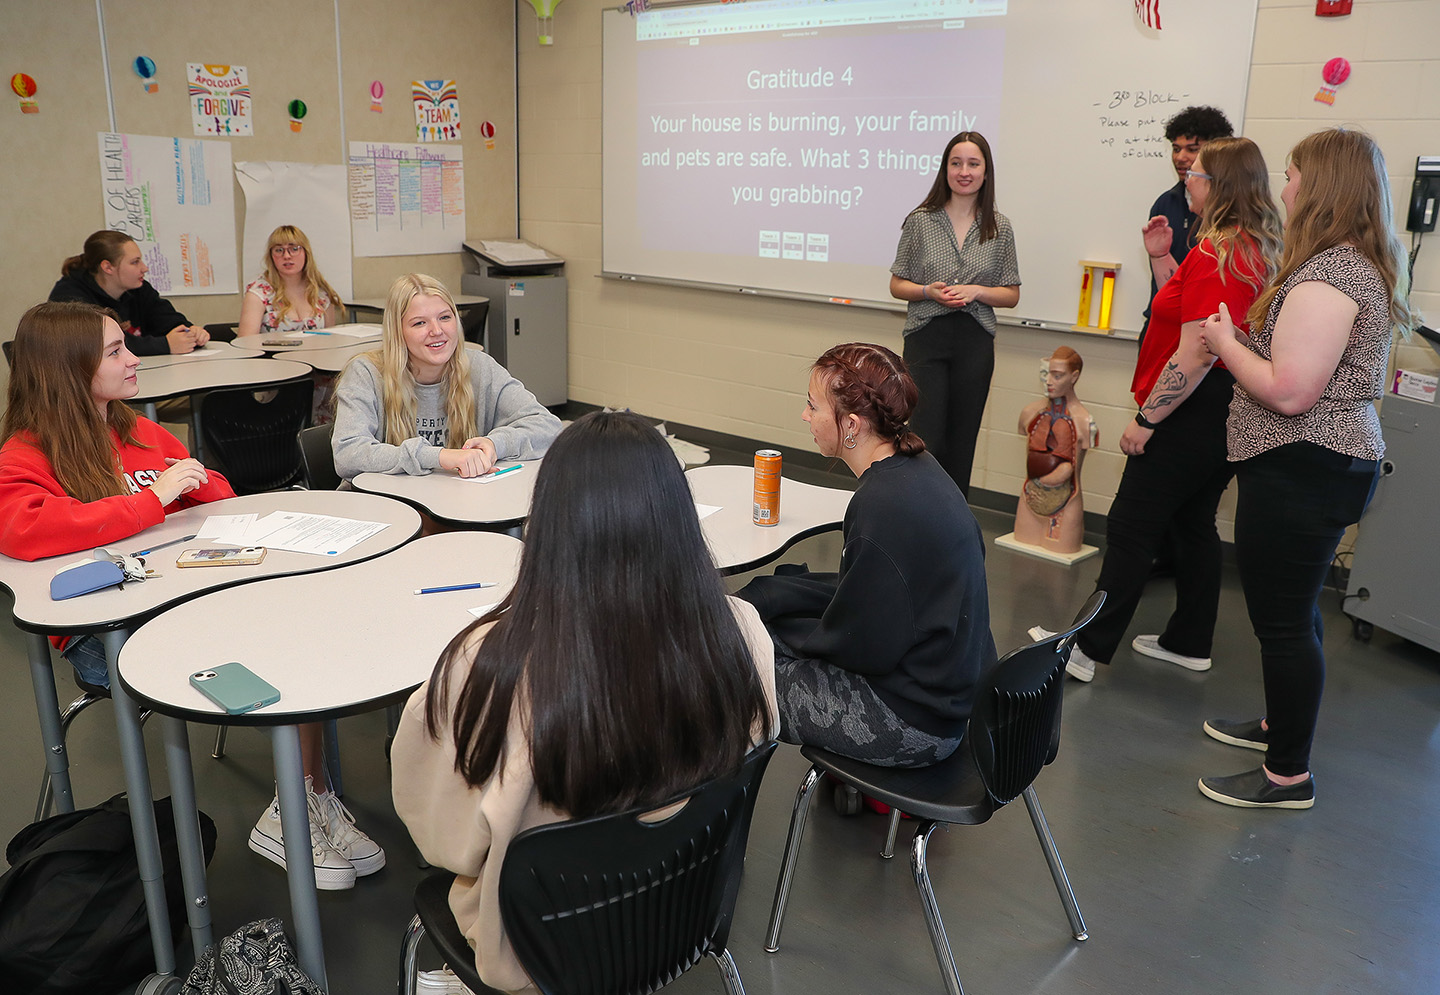 Members of the UNK social work student ambassador program discuss self-care strategies with Kearney High School students during a recent visit. (Photo by Erika Pritchard, UNK Communications)